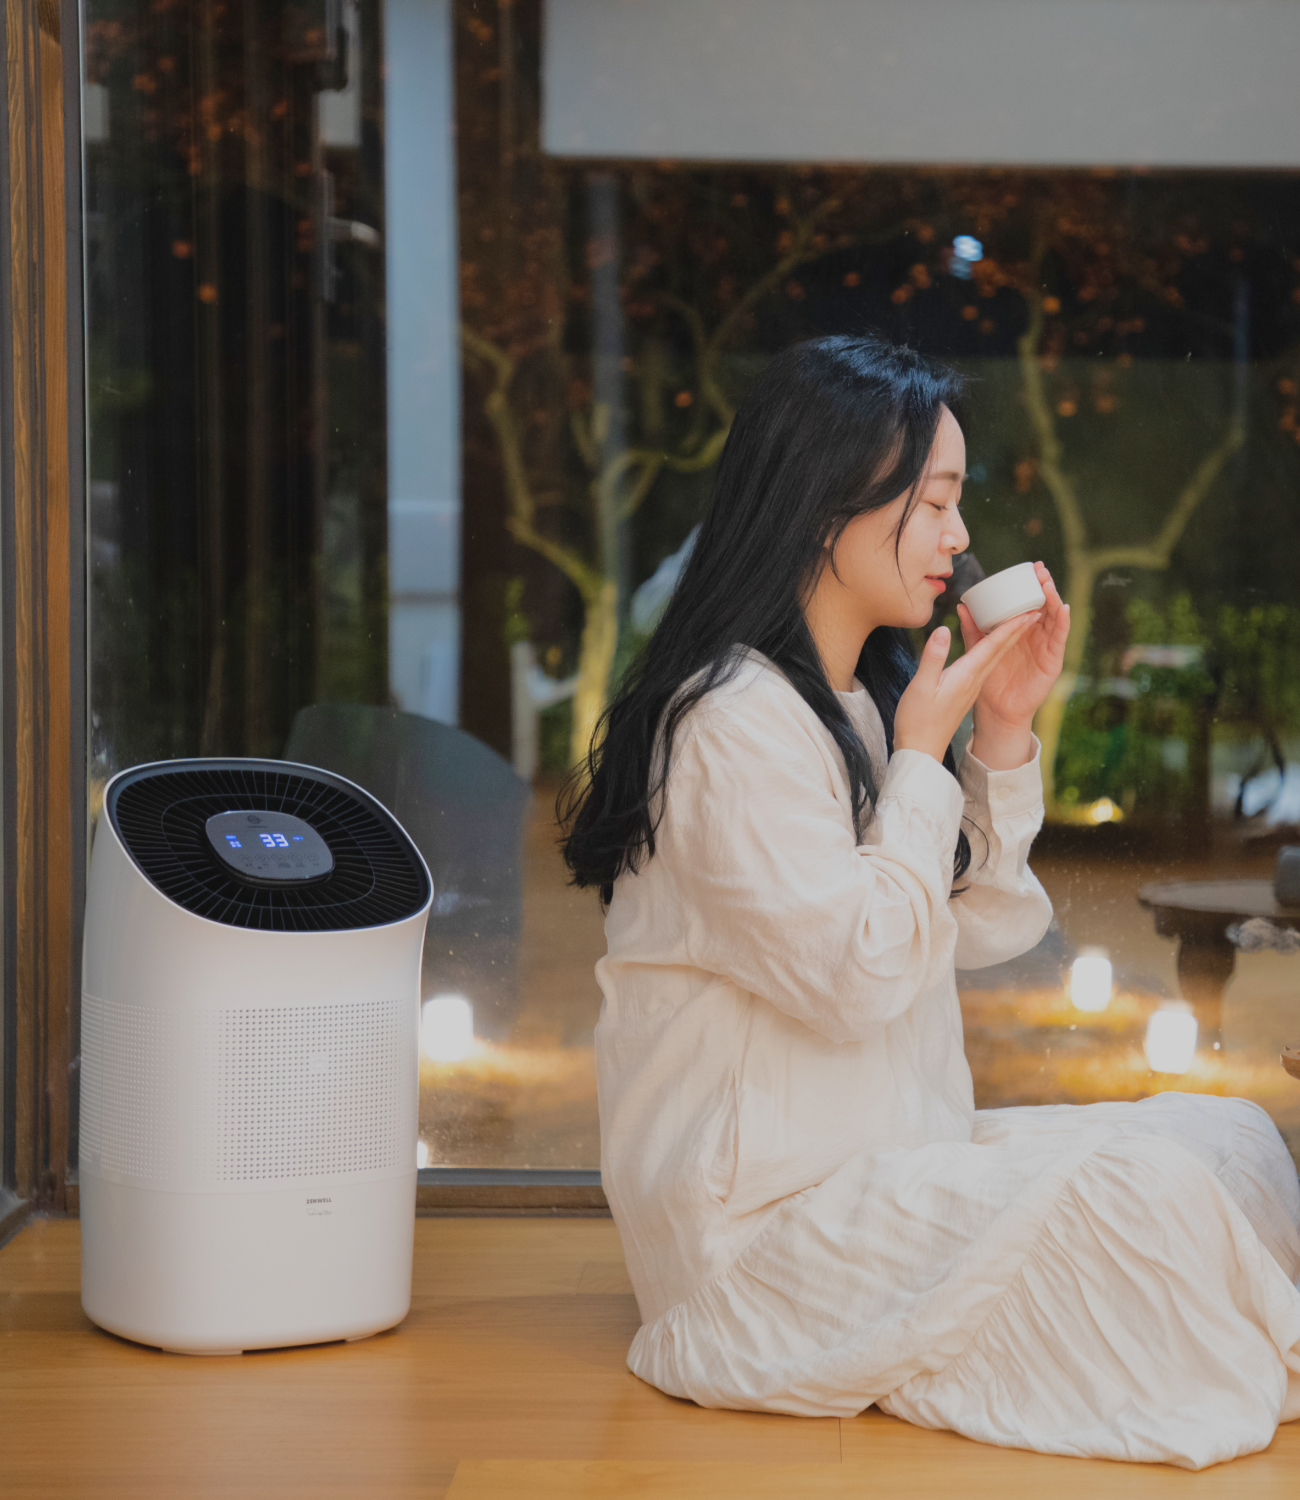 Woman sitting and peacefully drinking tea while Zenwell appliance runs in background